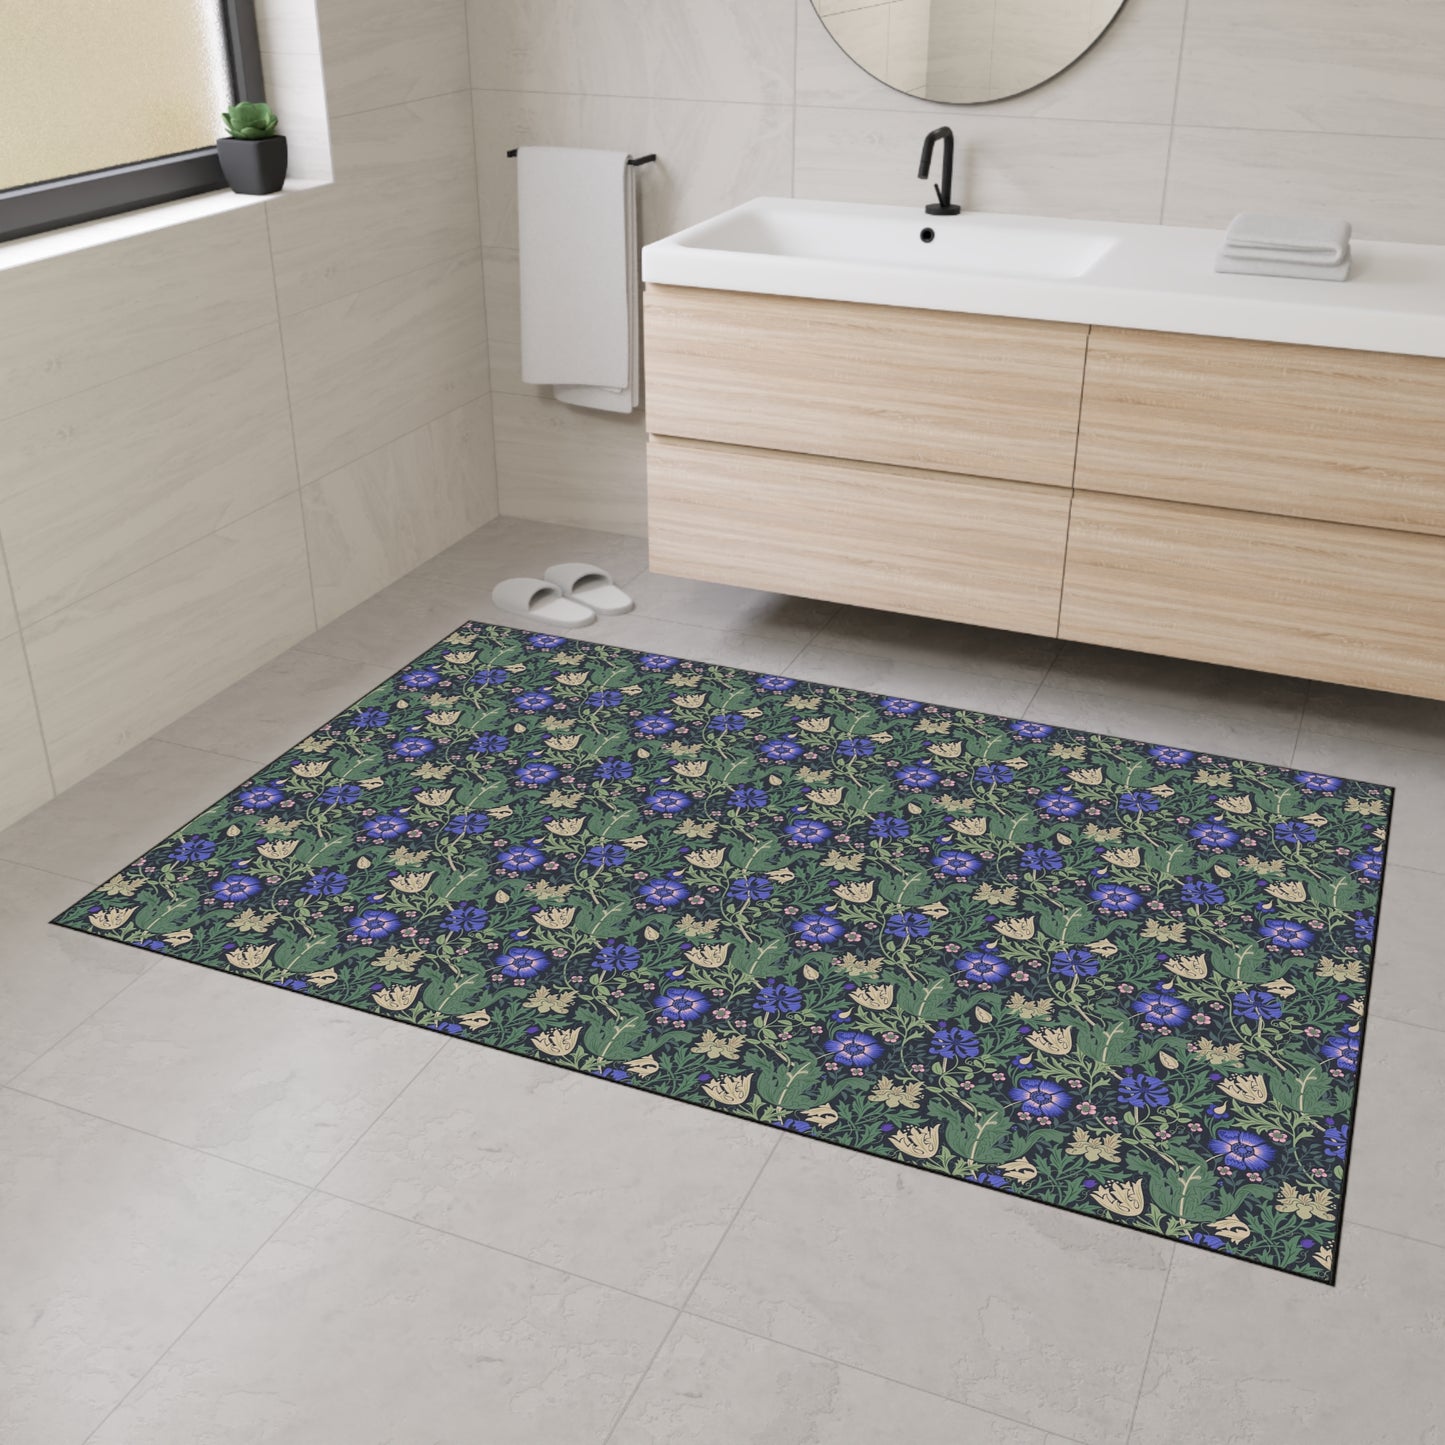 william-morris-co-heavy-duty-floor-mat-compton-collection-bluebell-cottage-8